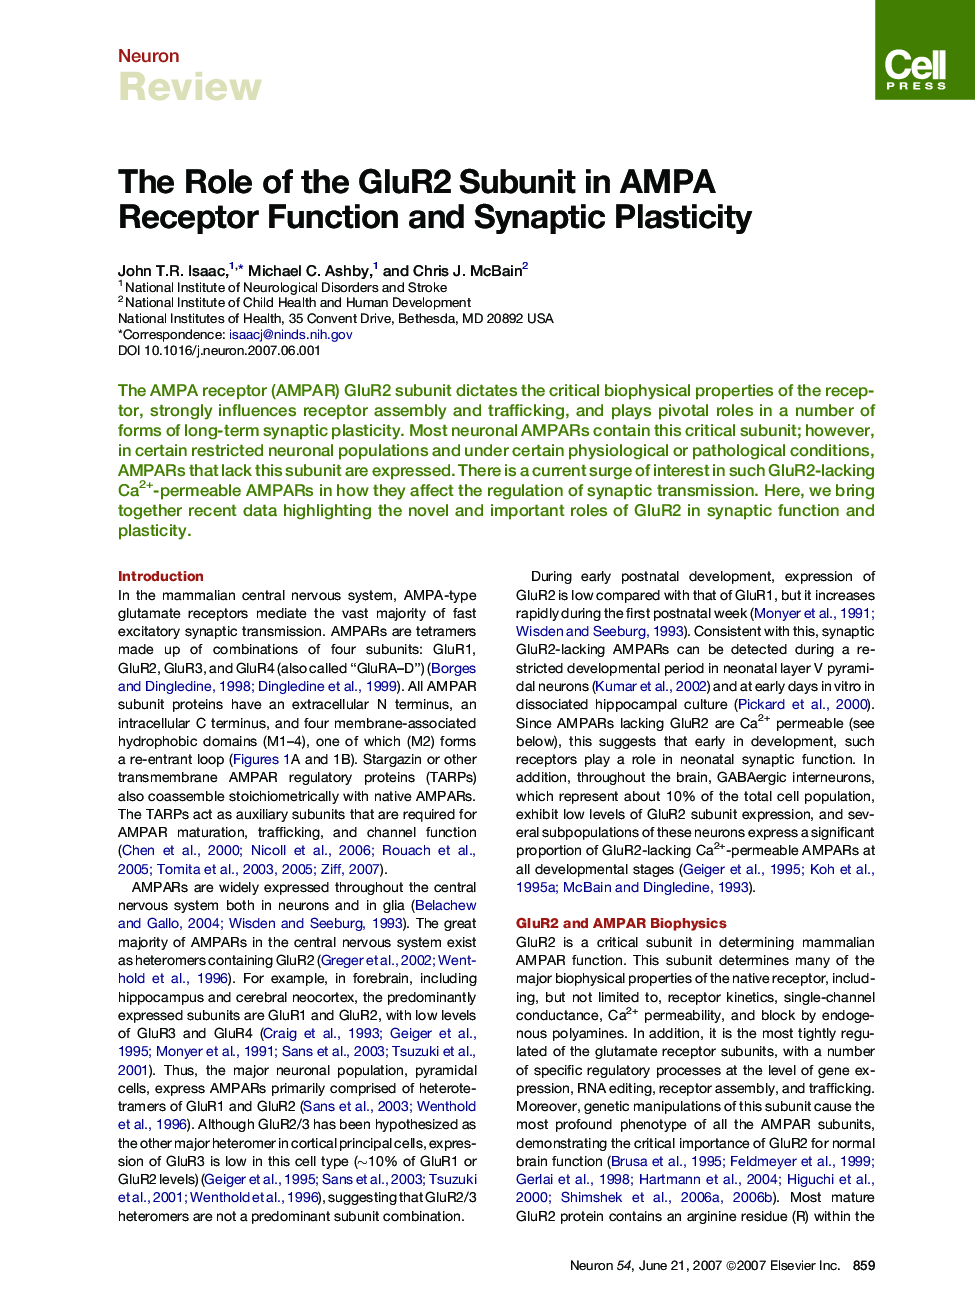 The Role of the GluR2 Subunit in AMPA Receptor Function and Synaptic Plasticity